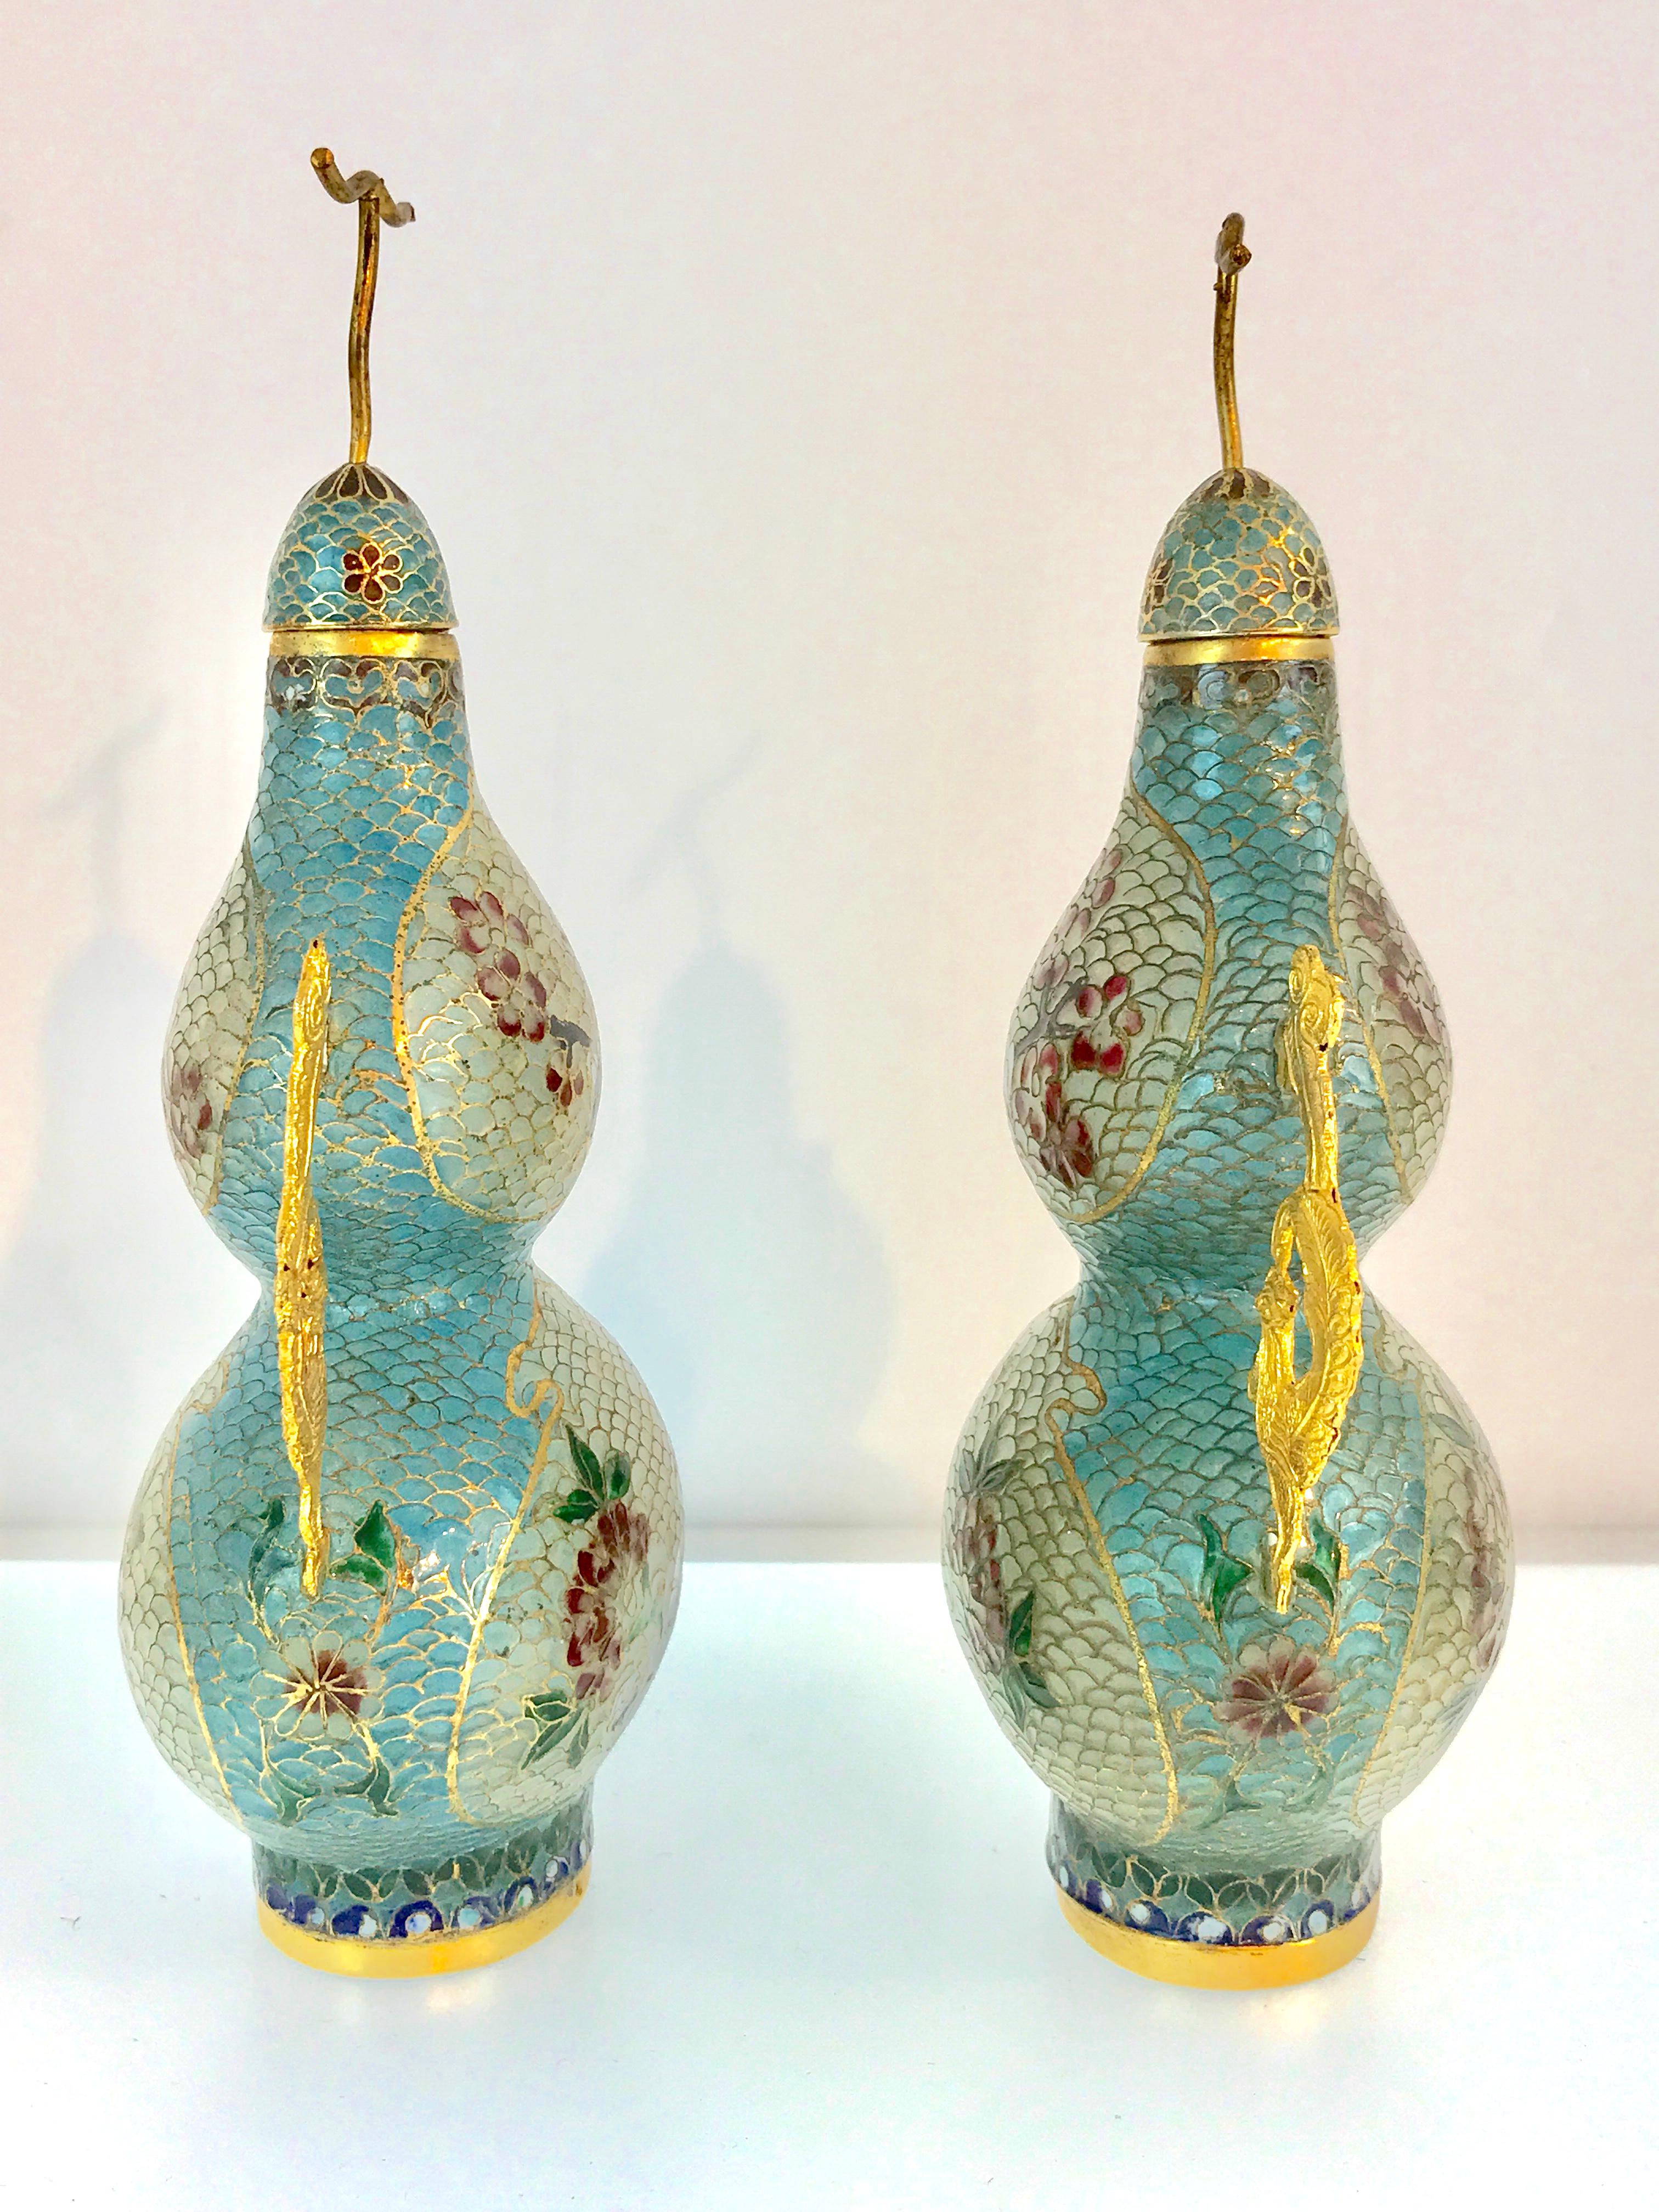 A pair of Chinese Plique-à-Jour enamel (translucent enamel) double gourd vases, each one with removable lid, exquisite all-over enamel decoration, each one signed with lotus flower.